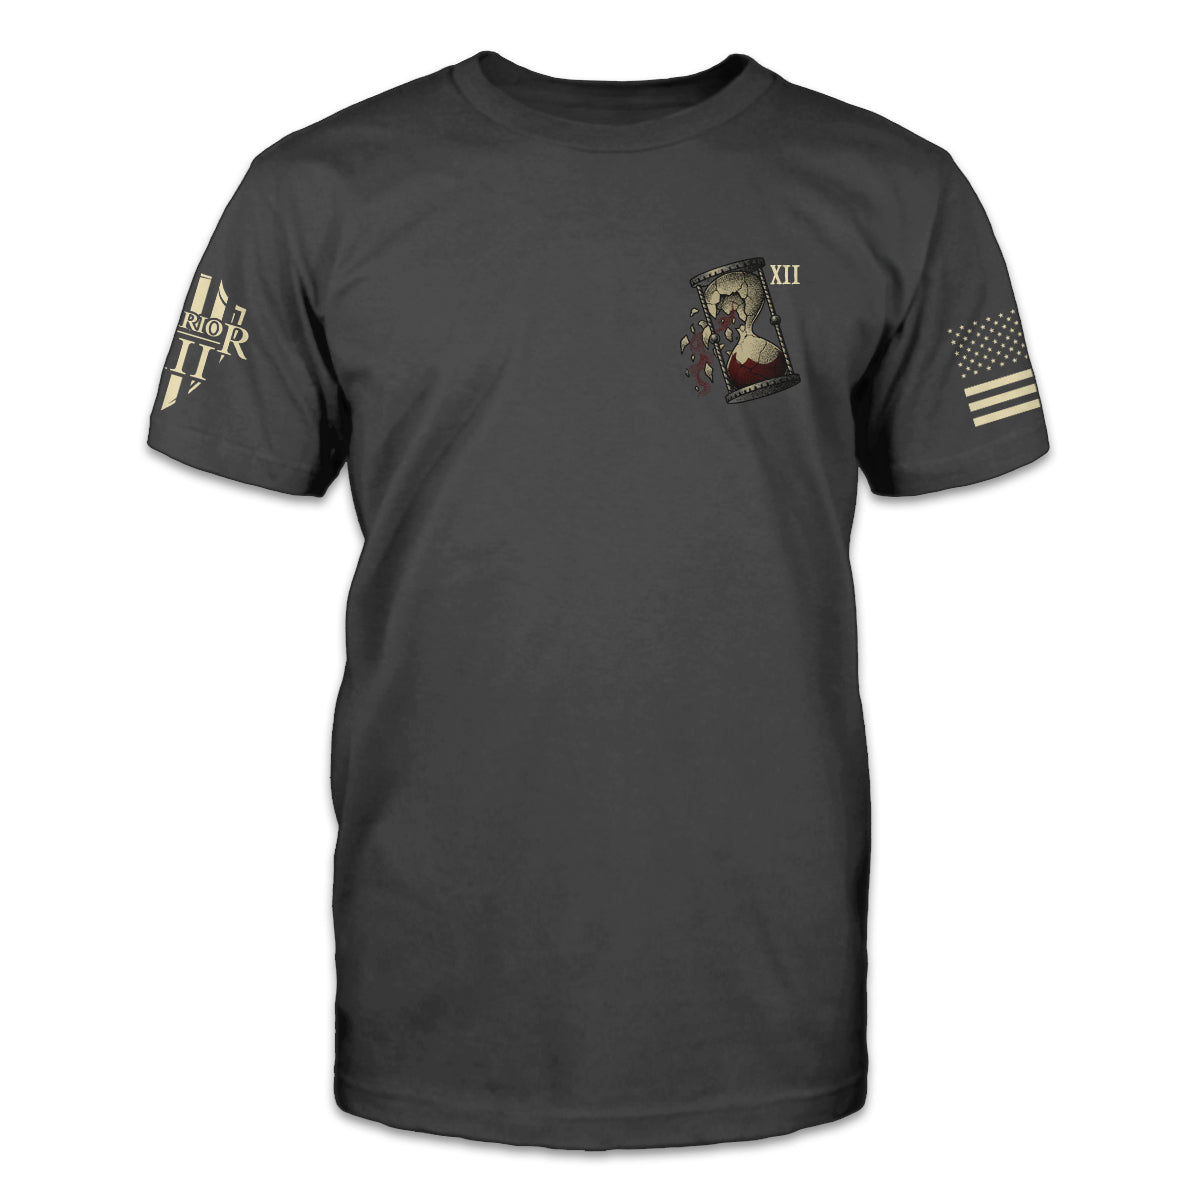 The front of an asphalt-gray shirt with a small pocket image of a broken hourglass.